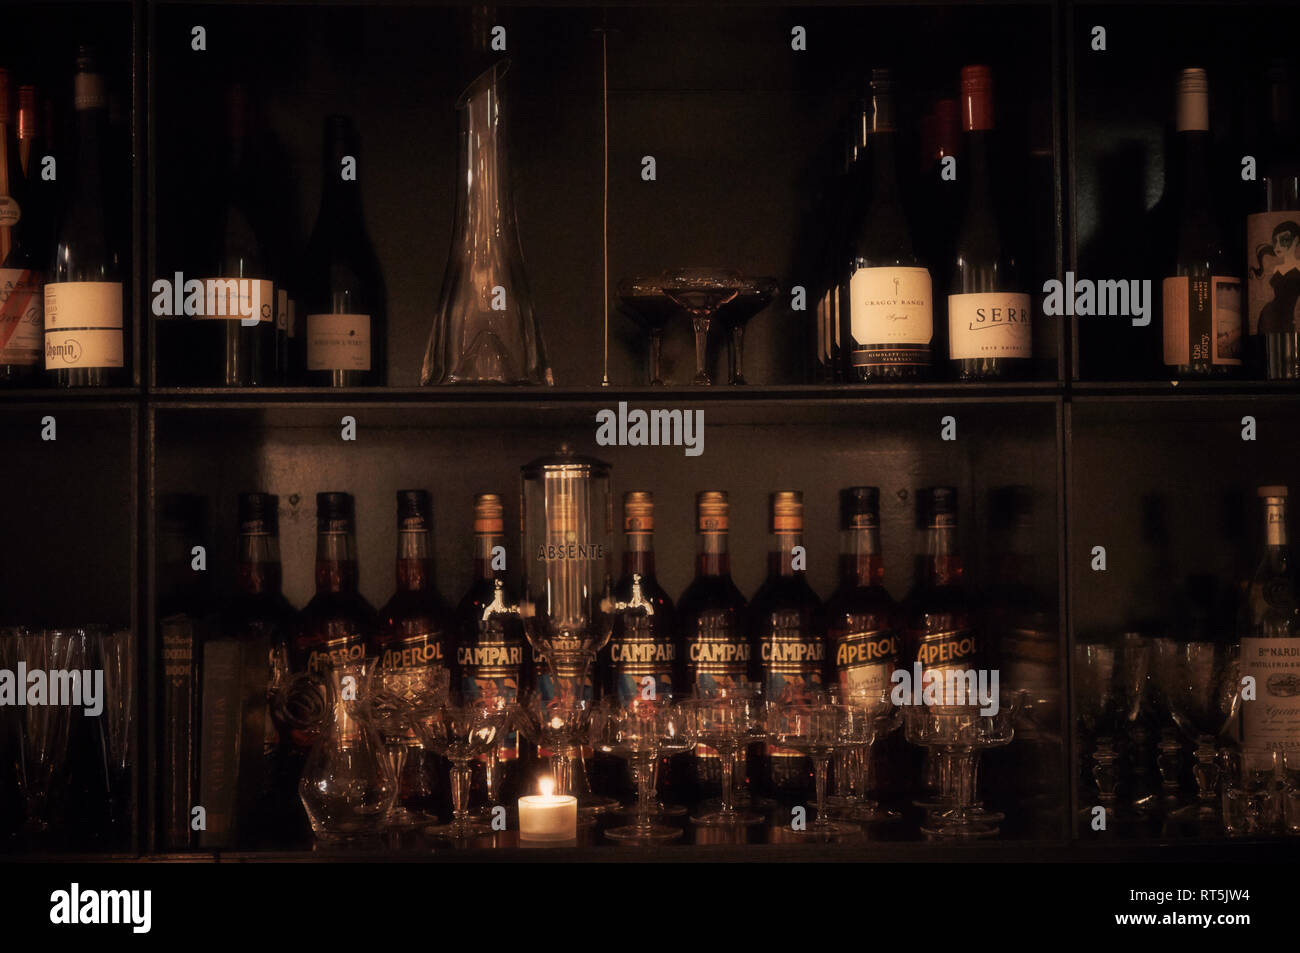 Several cocktail glasses and bottles of wine, Campari and Aperol on the shelves behind a bar. Stock Photo